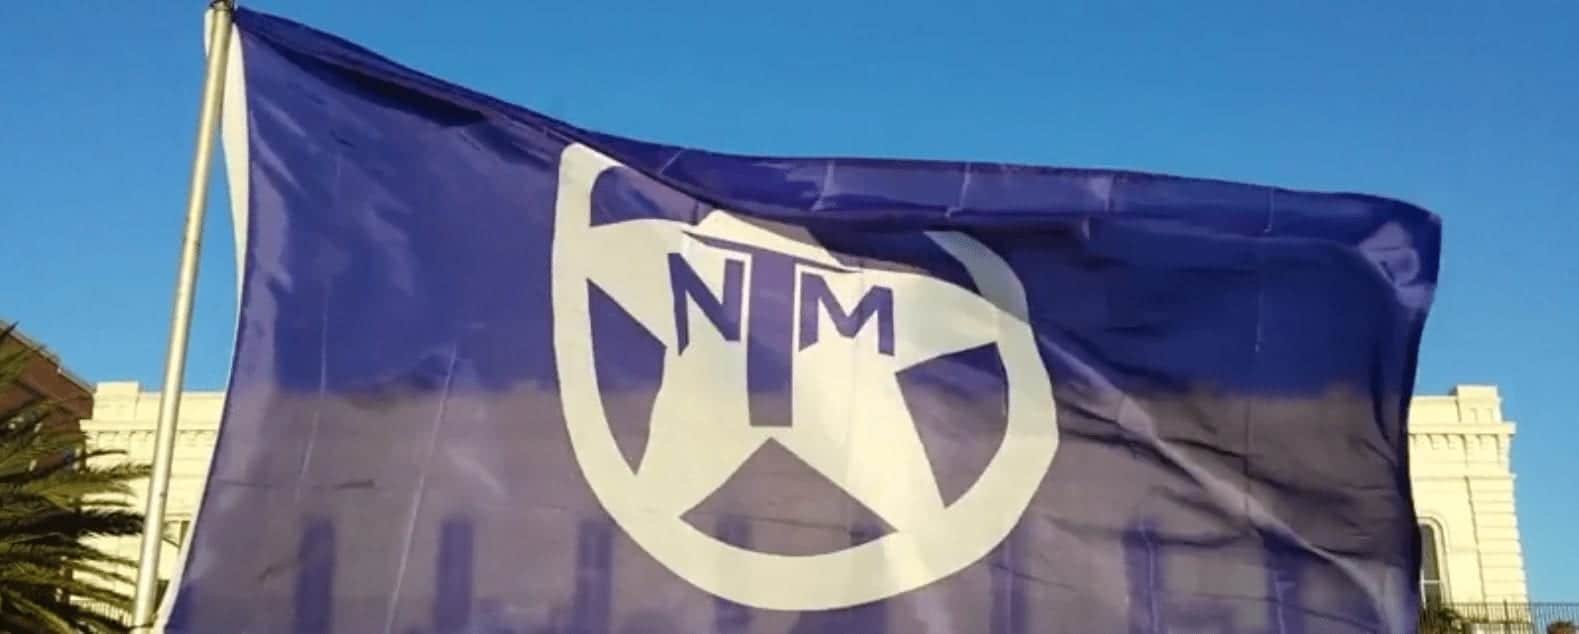 Official TNM Flag